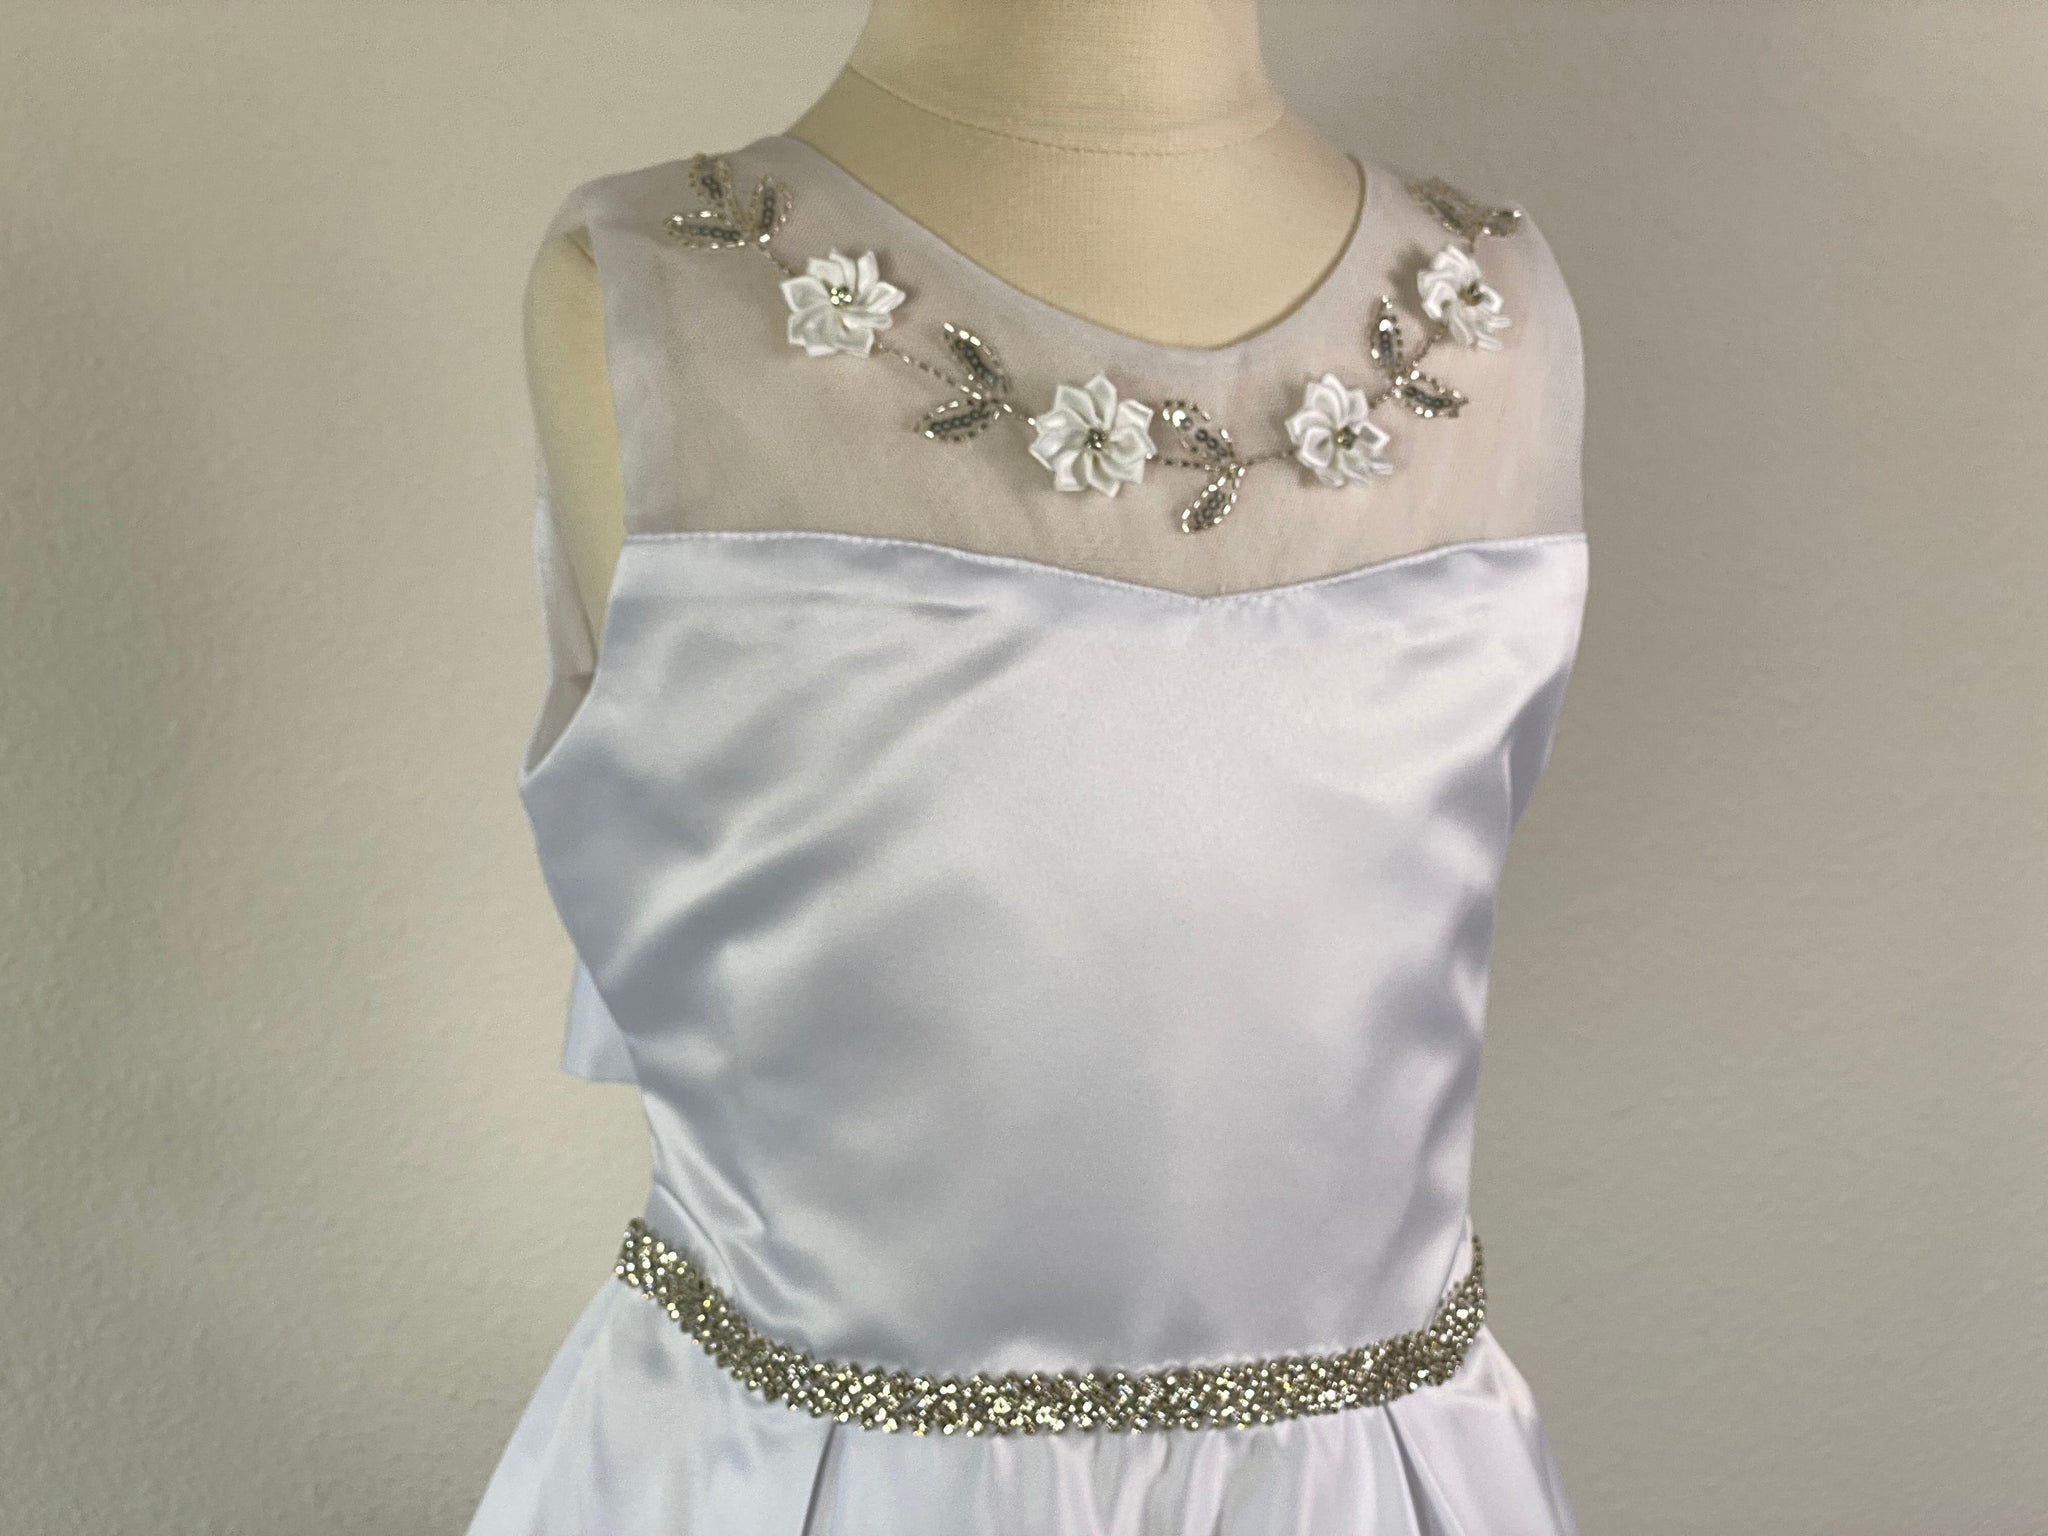 White, size 10 Satin and lace illusion bodice with flowers and beaded leaves Rhinestone belt Satin skirt Zipper Closure Satin ribbon for bow